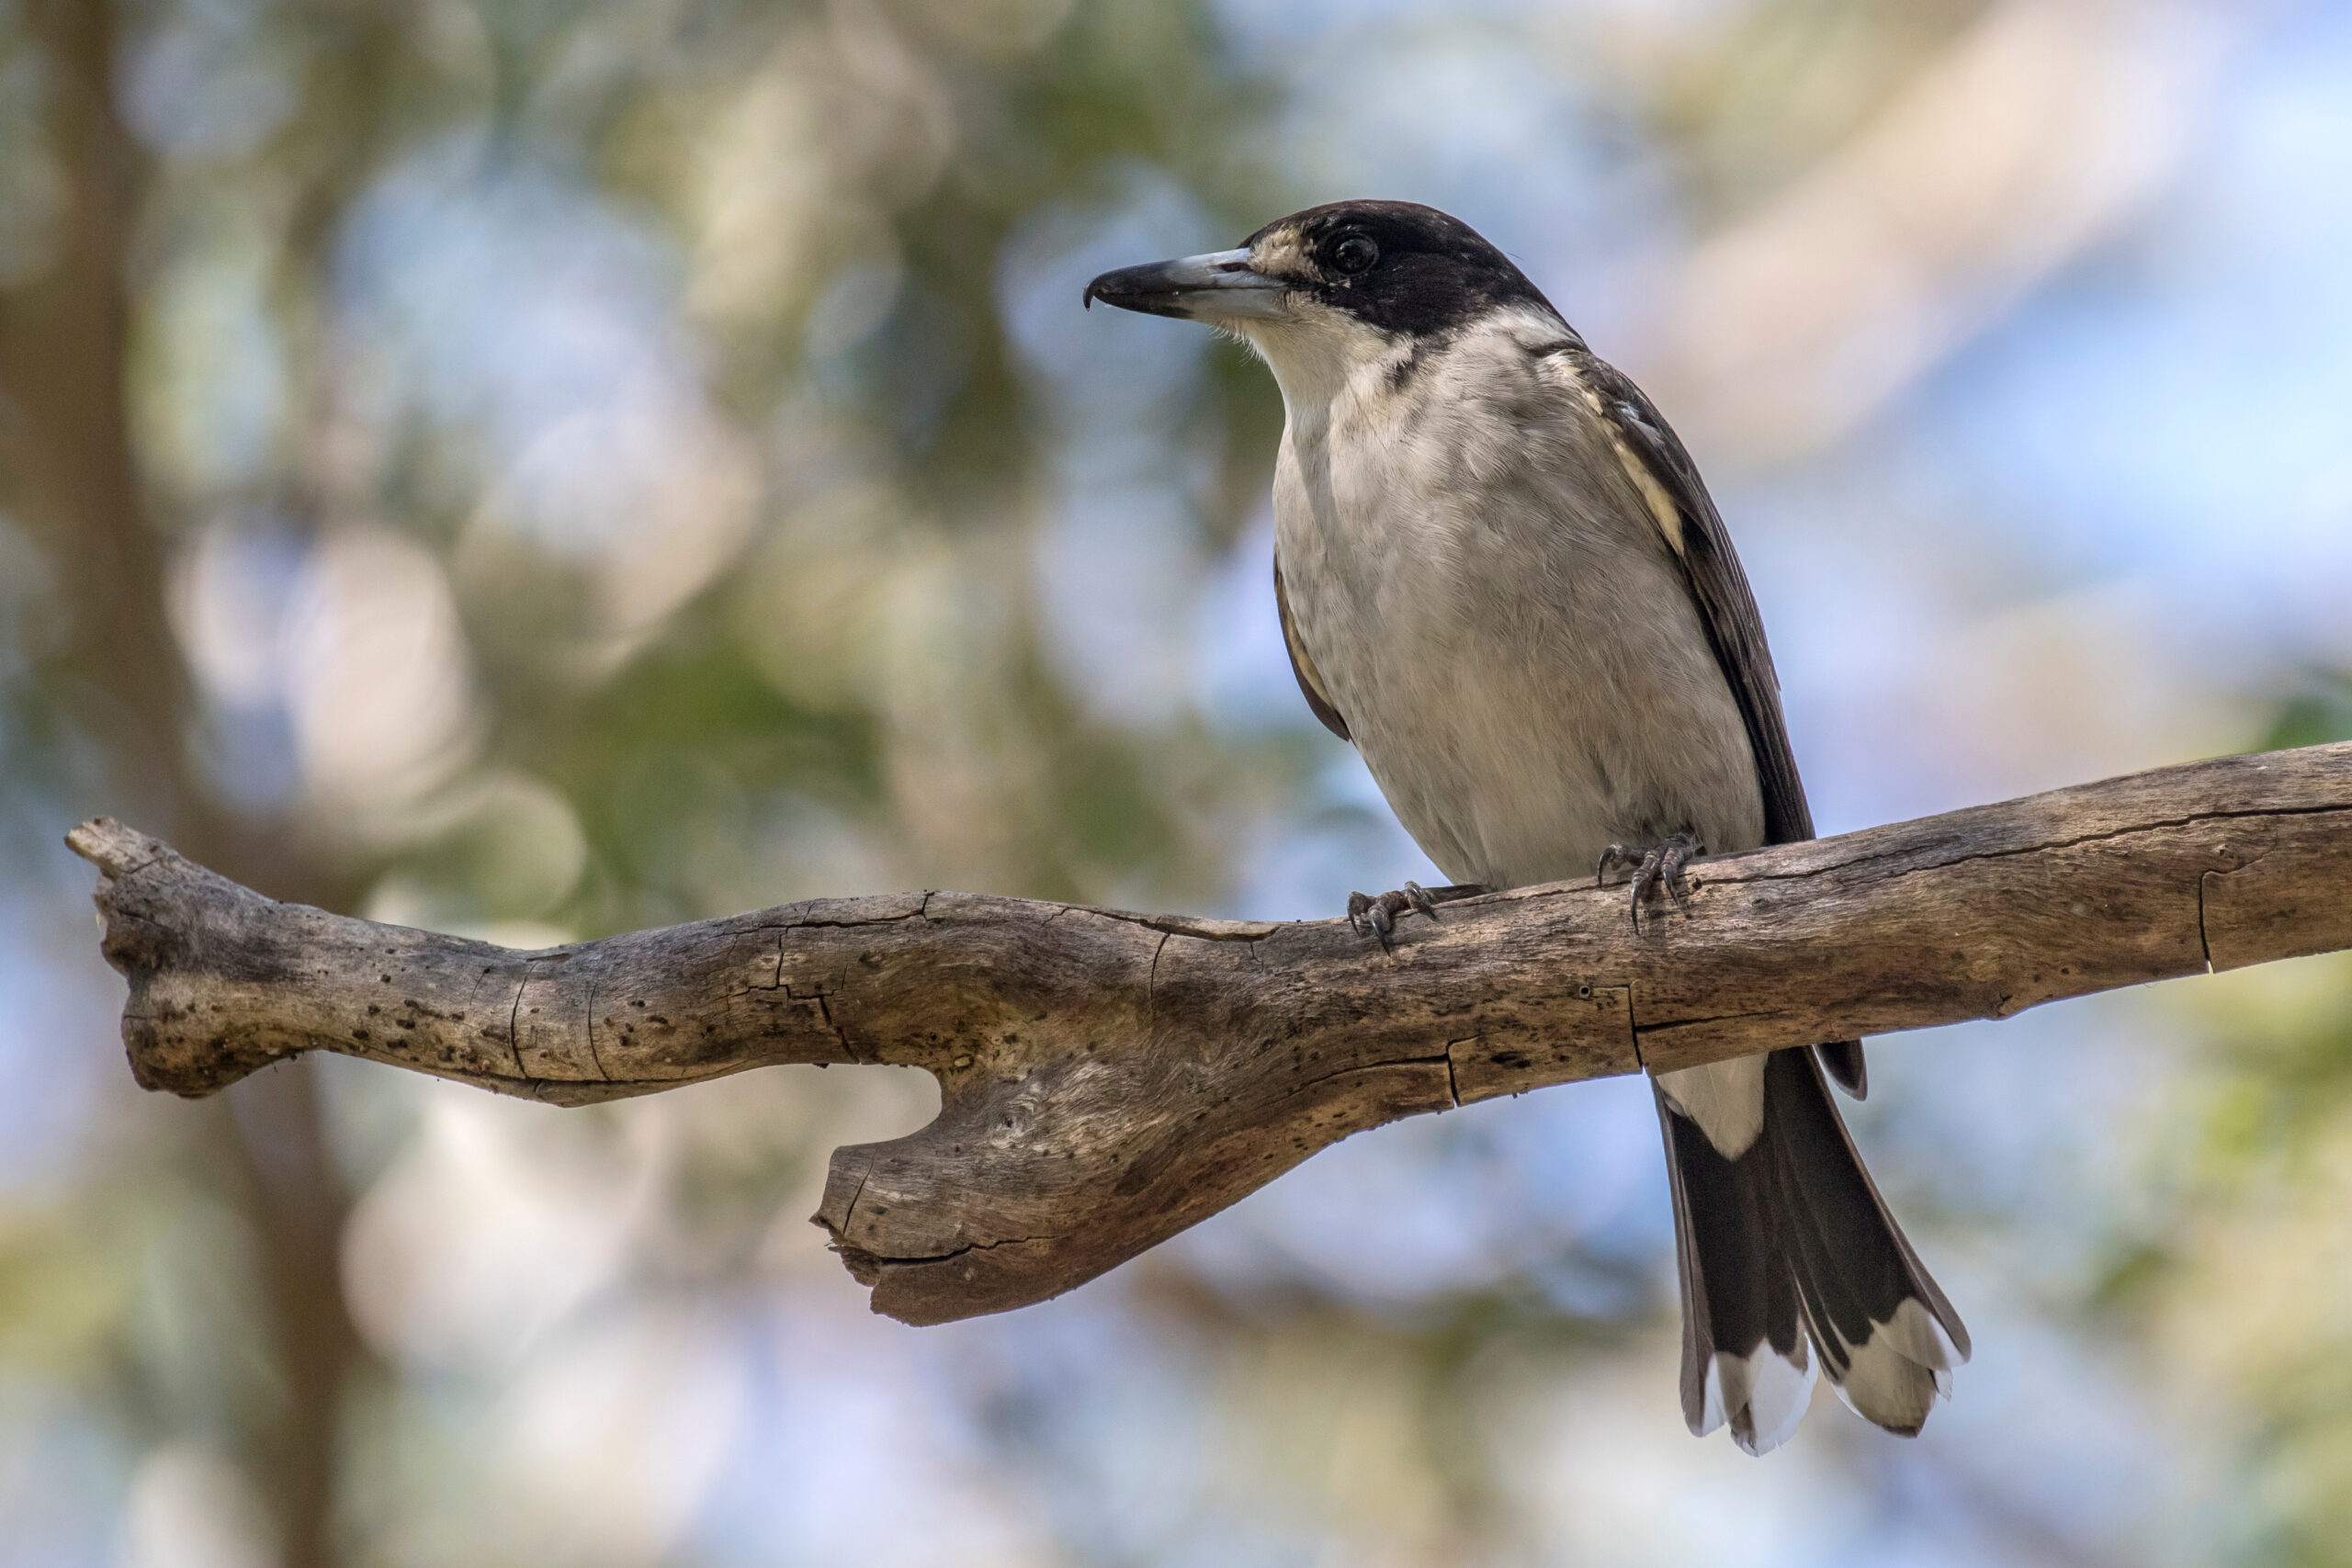 This is a close-up photo of a grey butcher bird resting on a brown tree branch. The bird has a black head, back and tailfeathers. Its breast is a grey/white colour, which extends under its chin and above its beak. Its beak is mostly grey and black at the tip. It has a black beady eye. The background of the image is blurred and shows brown tree trunks and green leaves. 